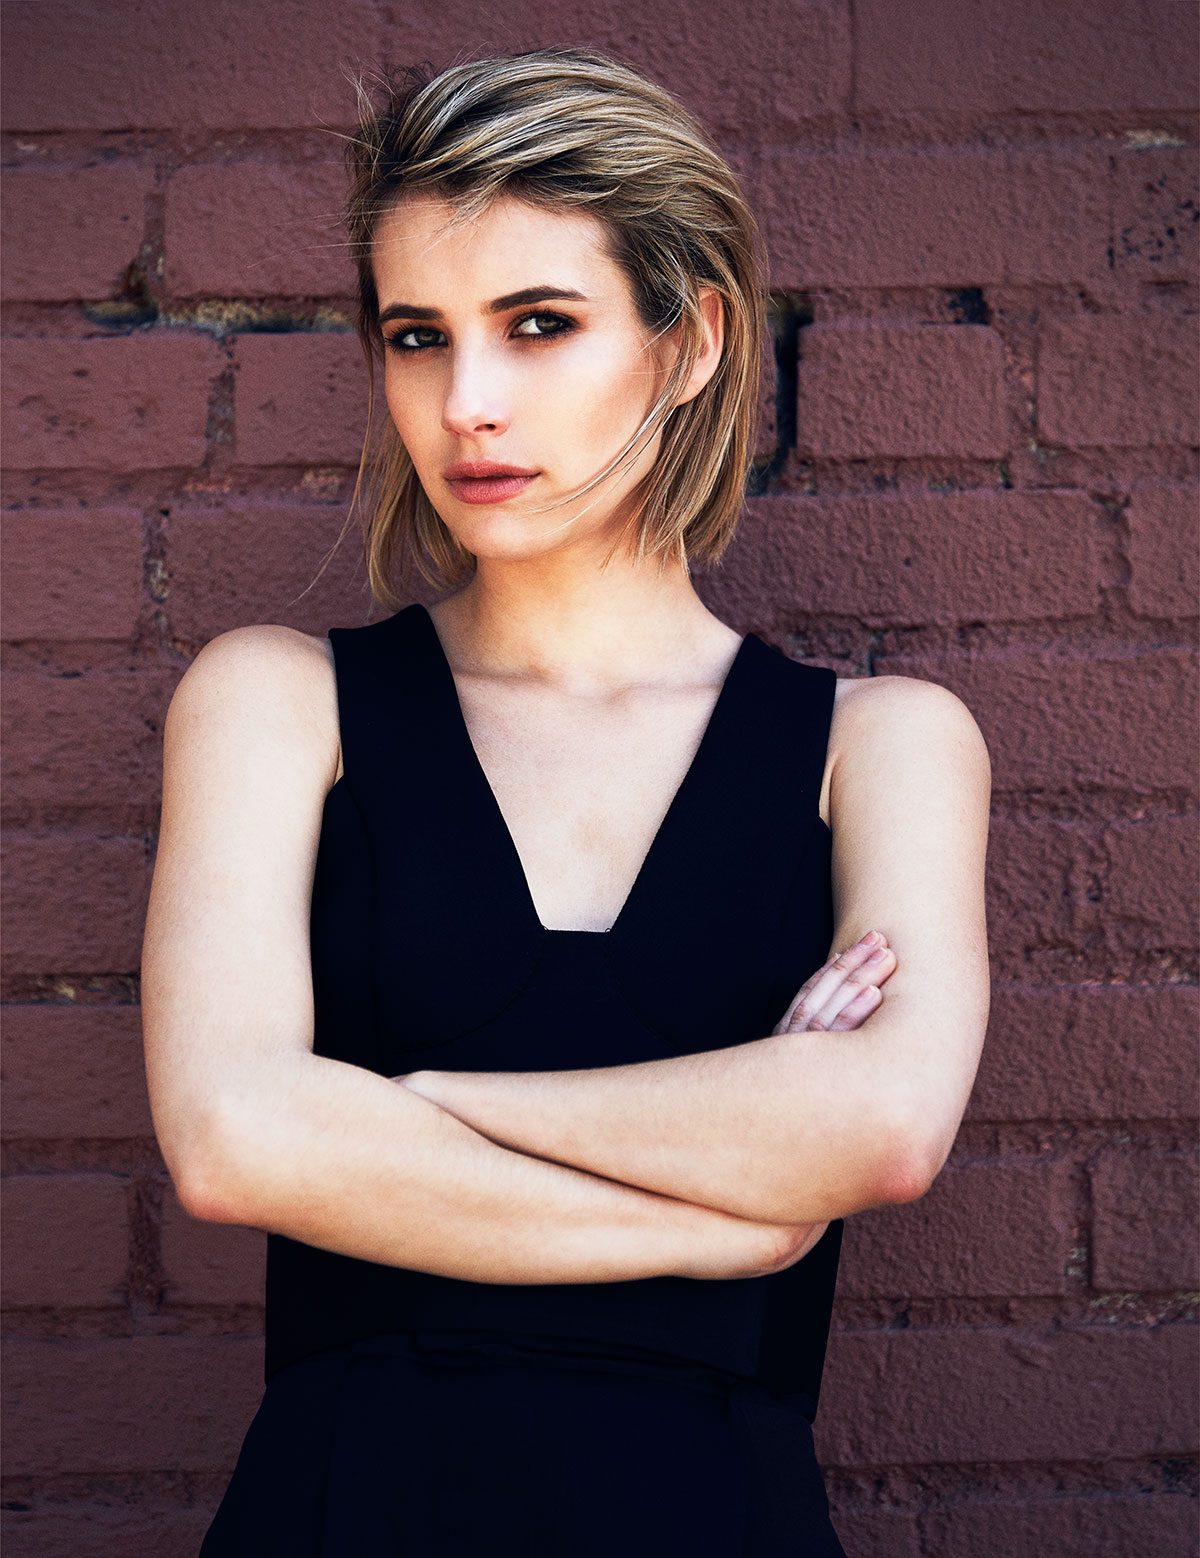 People 1200x1558 women actress Emma Roberts American women wall bricks arms crossed black clothing blonde dyed hair red lipstick looking at viewer portrait display